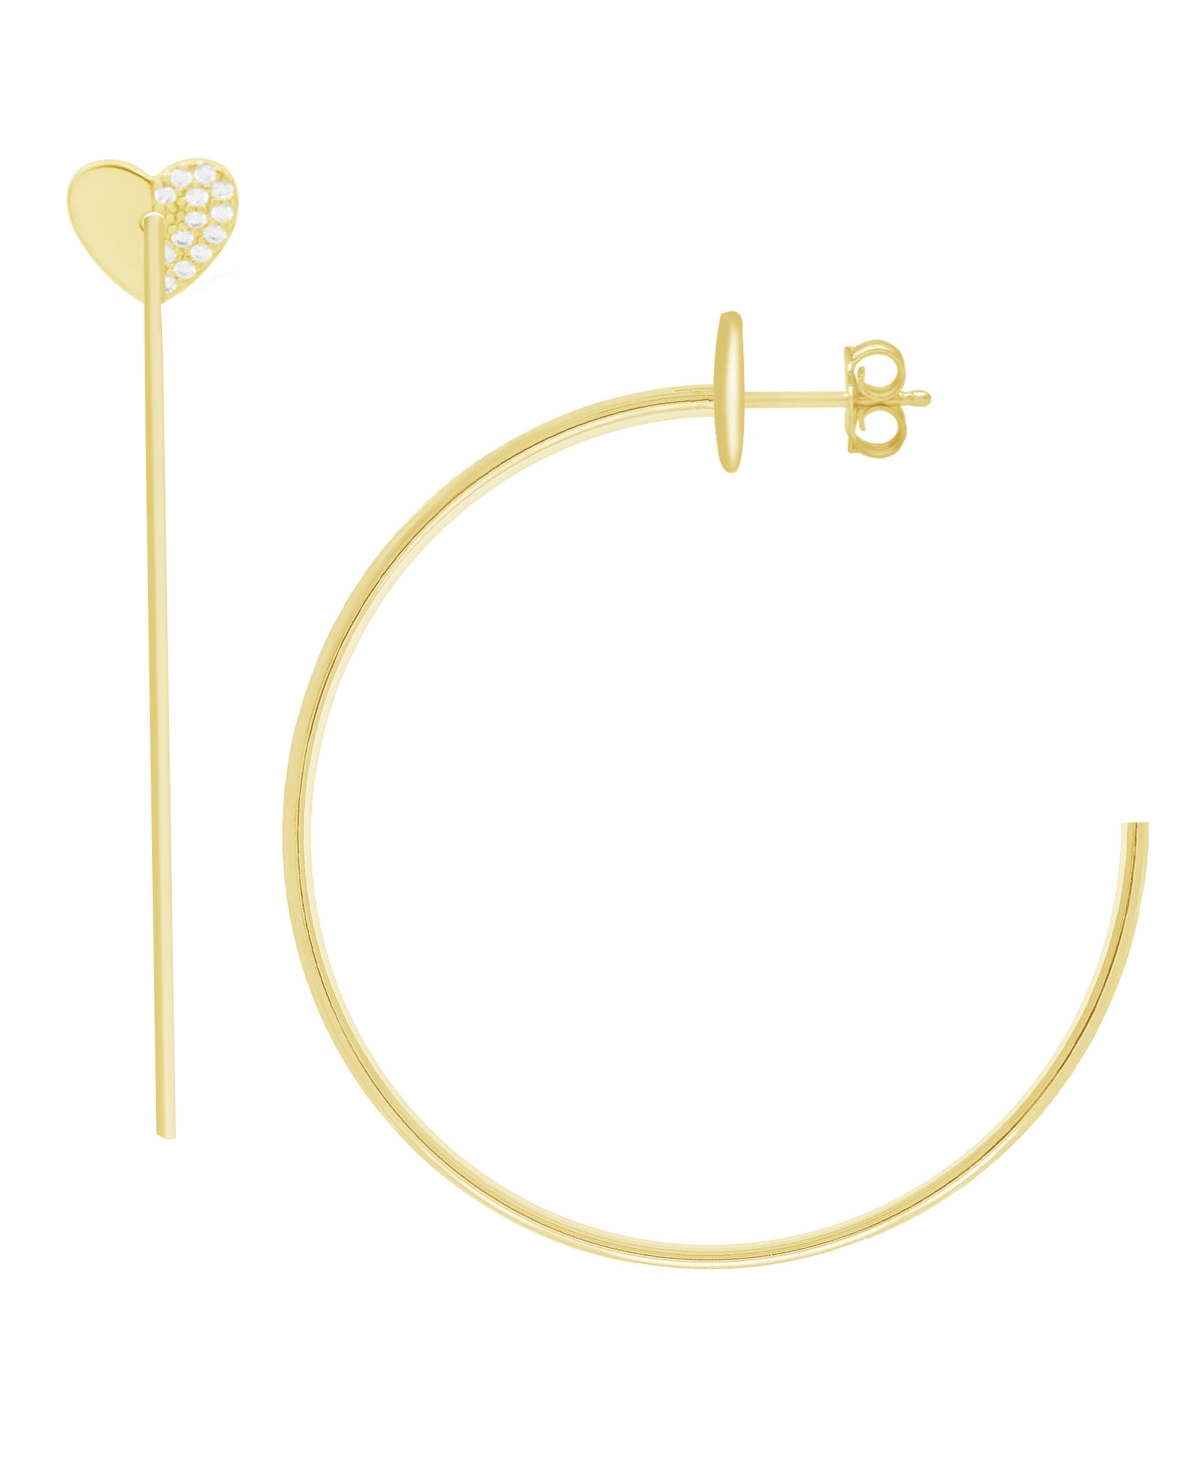 And Now This High Polished Cubic Zirconia Pave Heart C Hoop Earring, Gold Plate - Gold-Tone